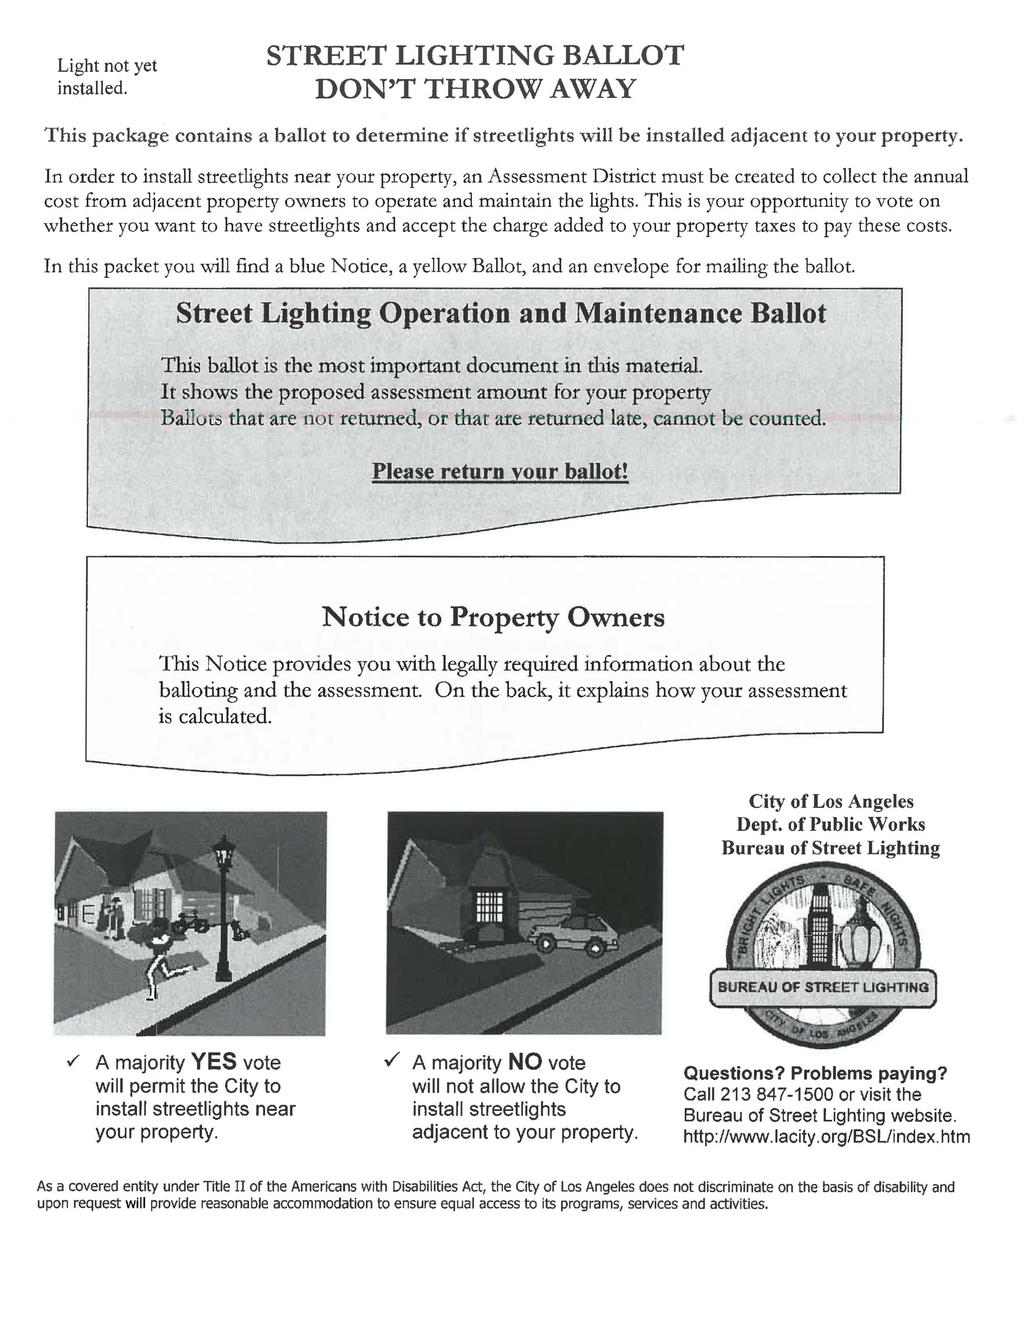 STREET LIGHTING BALLOT DON T THROW AWAY Light not yet installed. This package contains a ballot to determine if streetlights will be installed adjacent to your property.